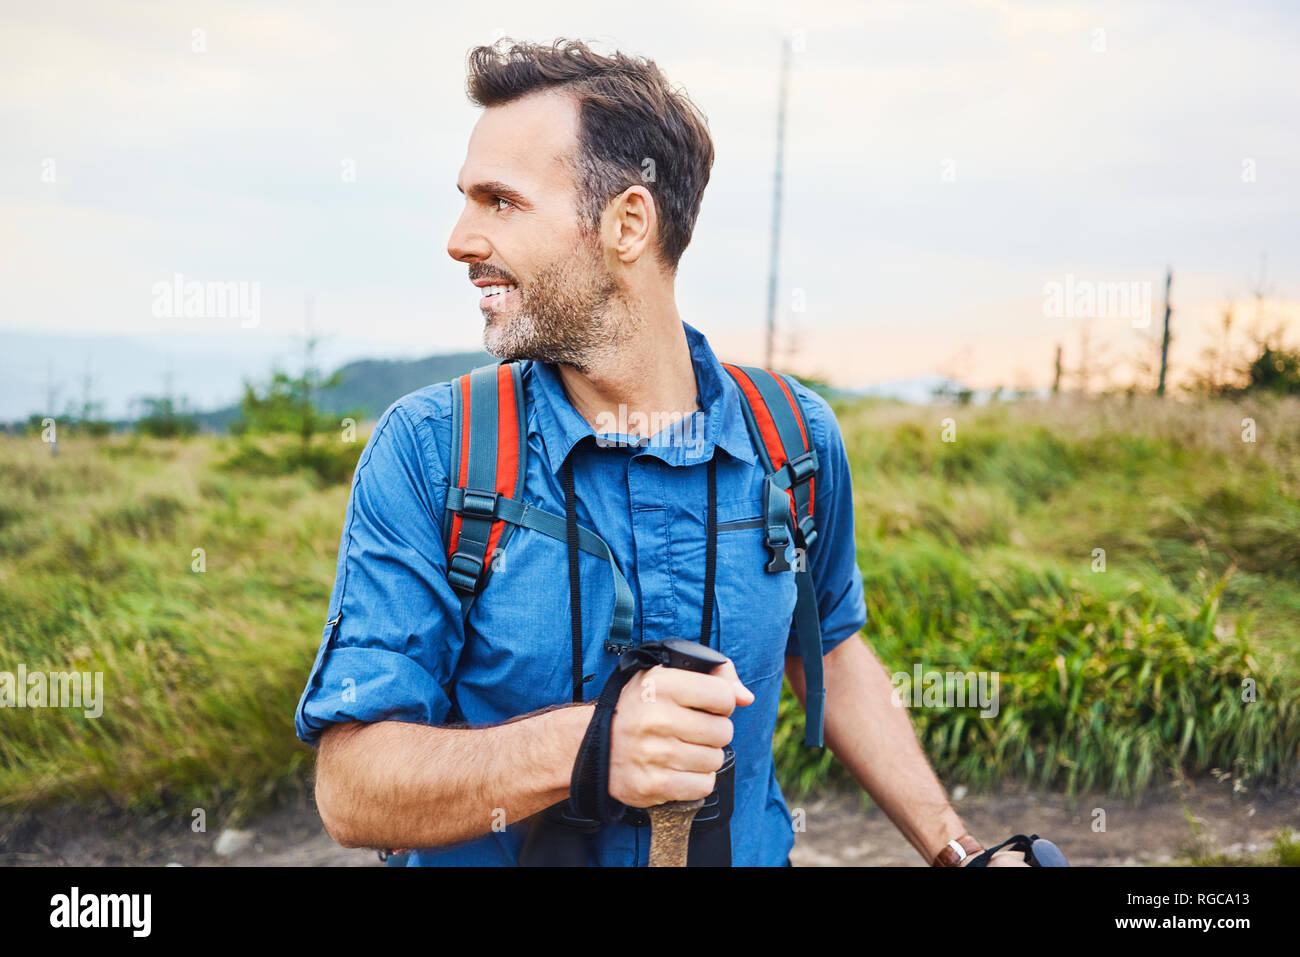 Smiling man hiking in the mountains turning round Stock Photo